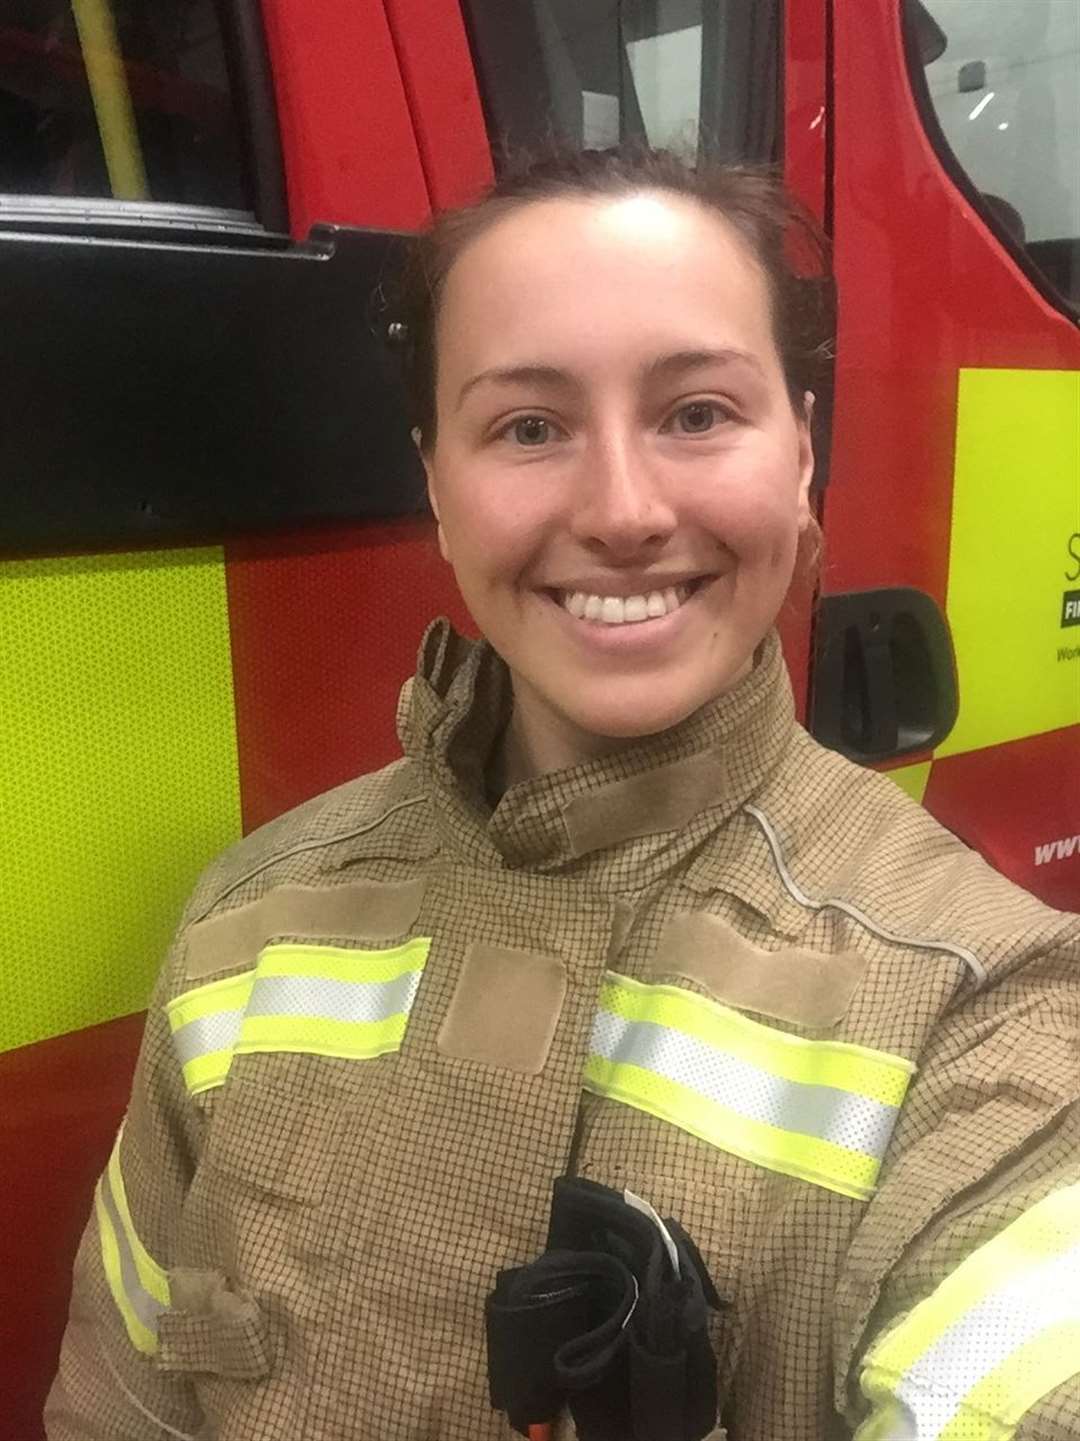 Louise has been a firefighter for three-and-a-half years.